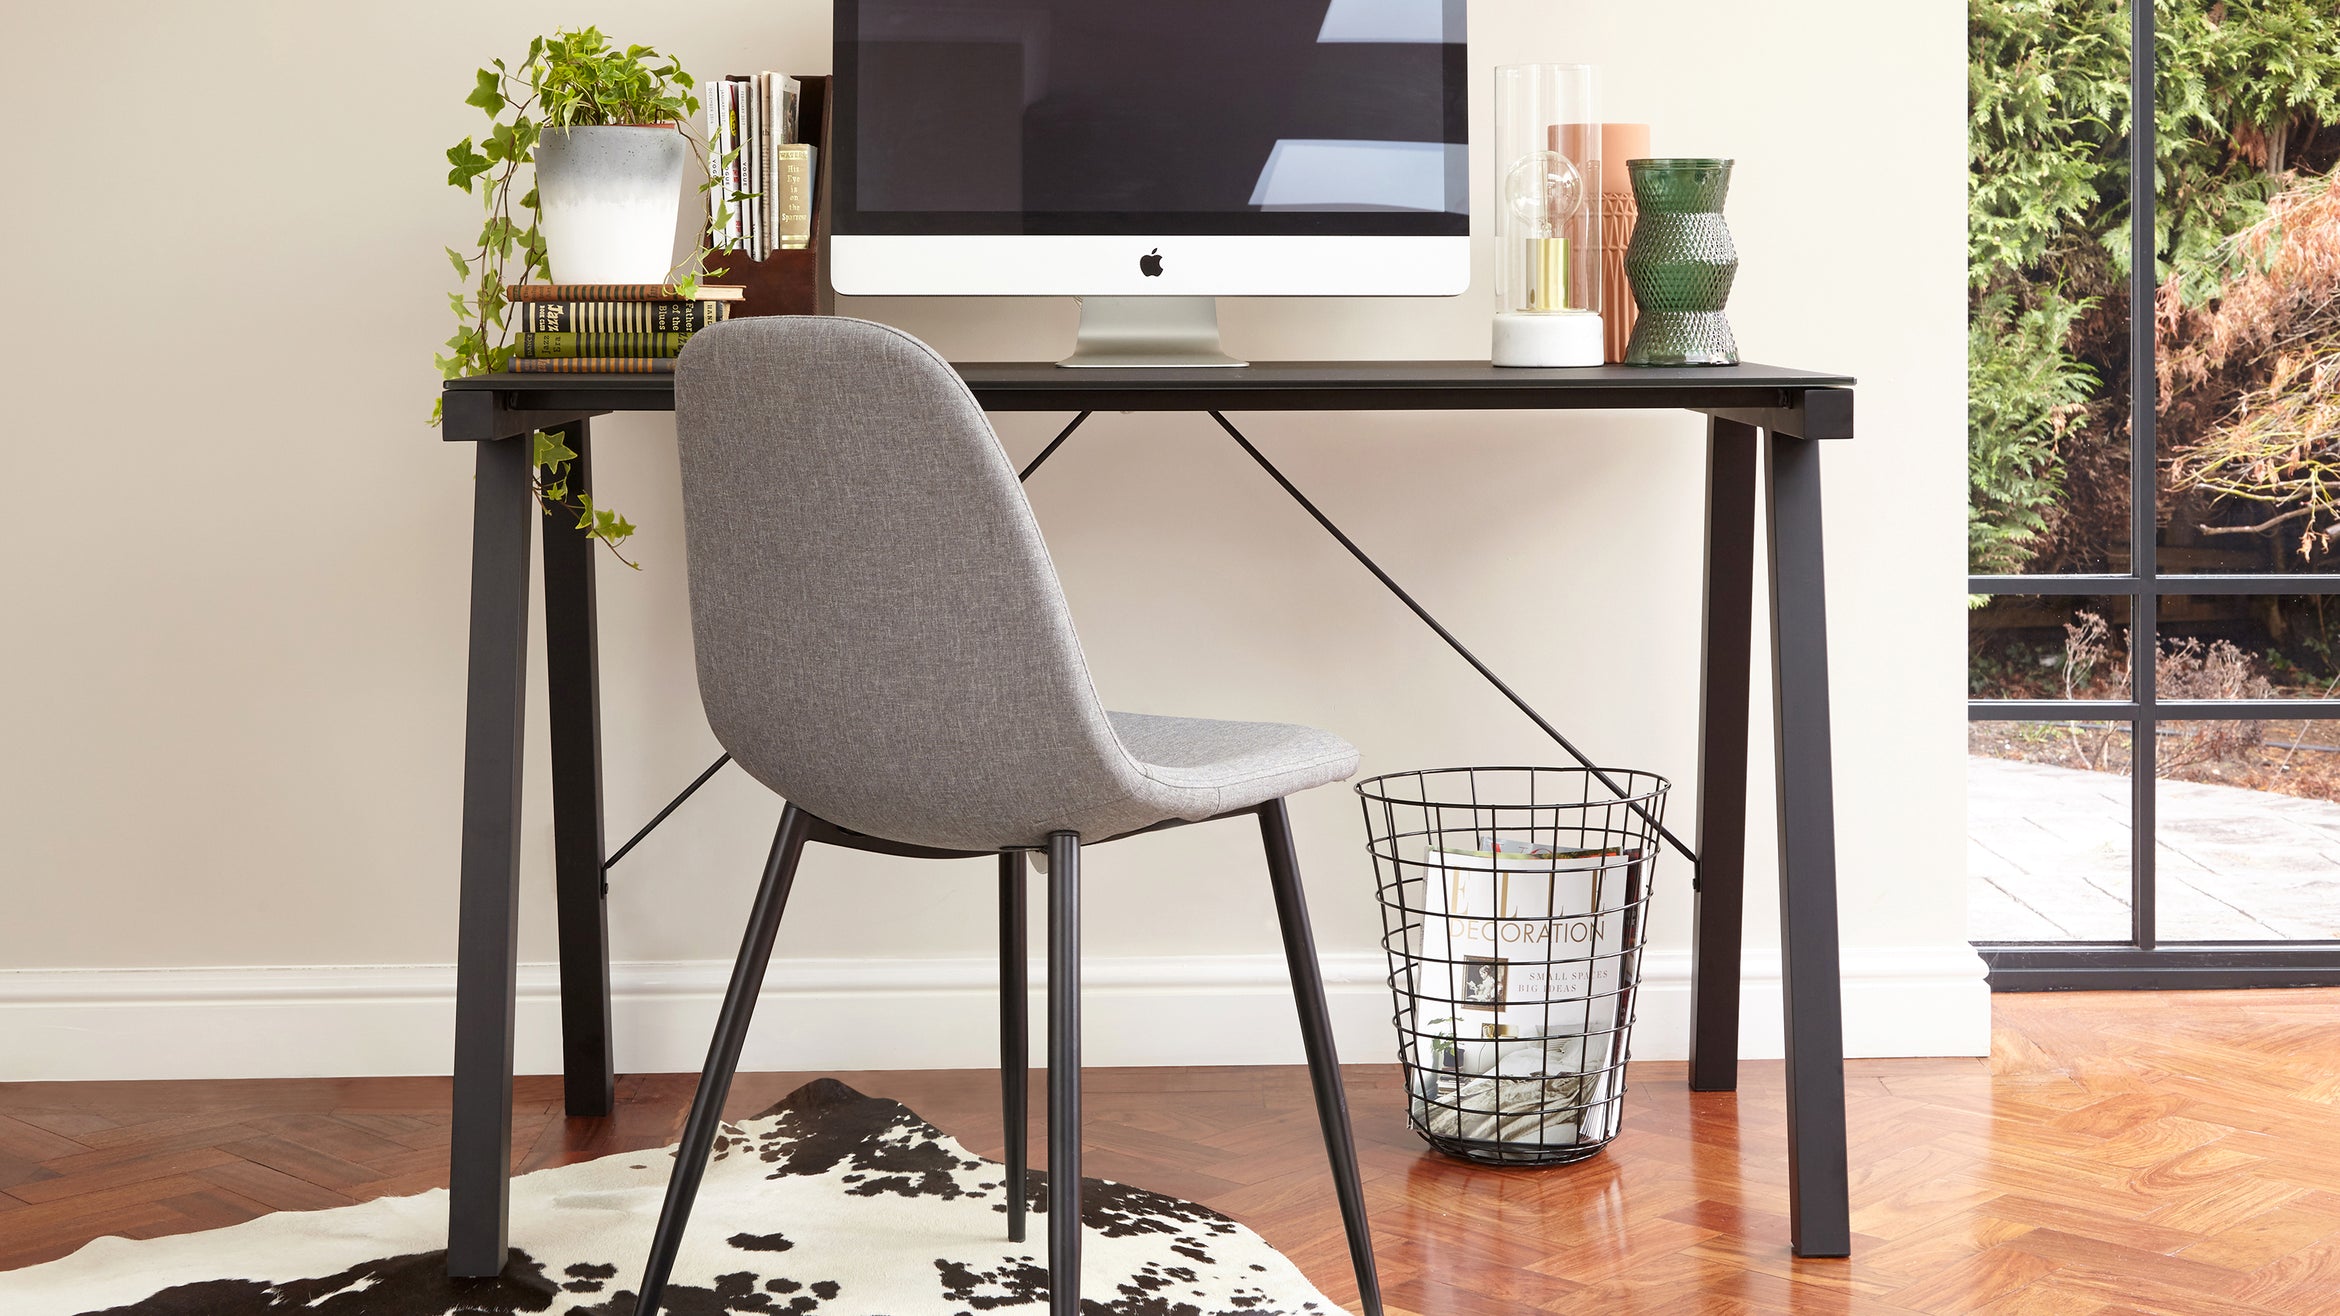 Desks Guide: How To Create Your Dream Home Office